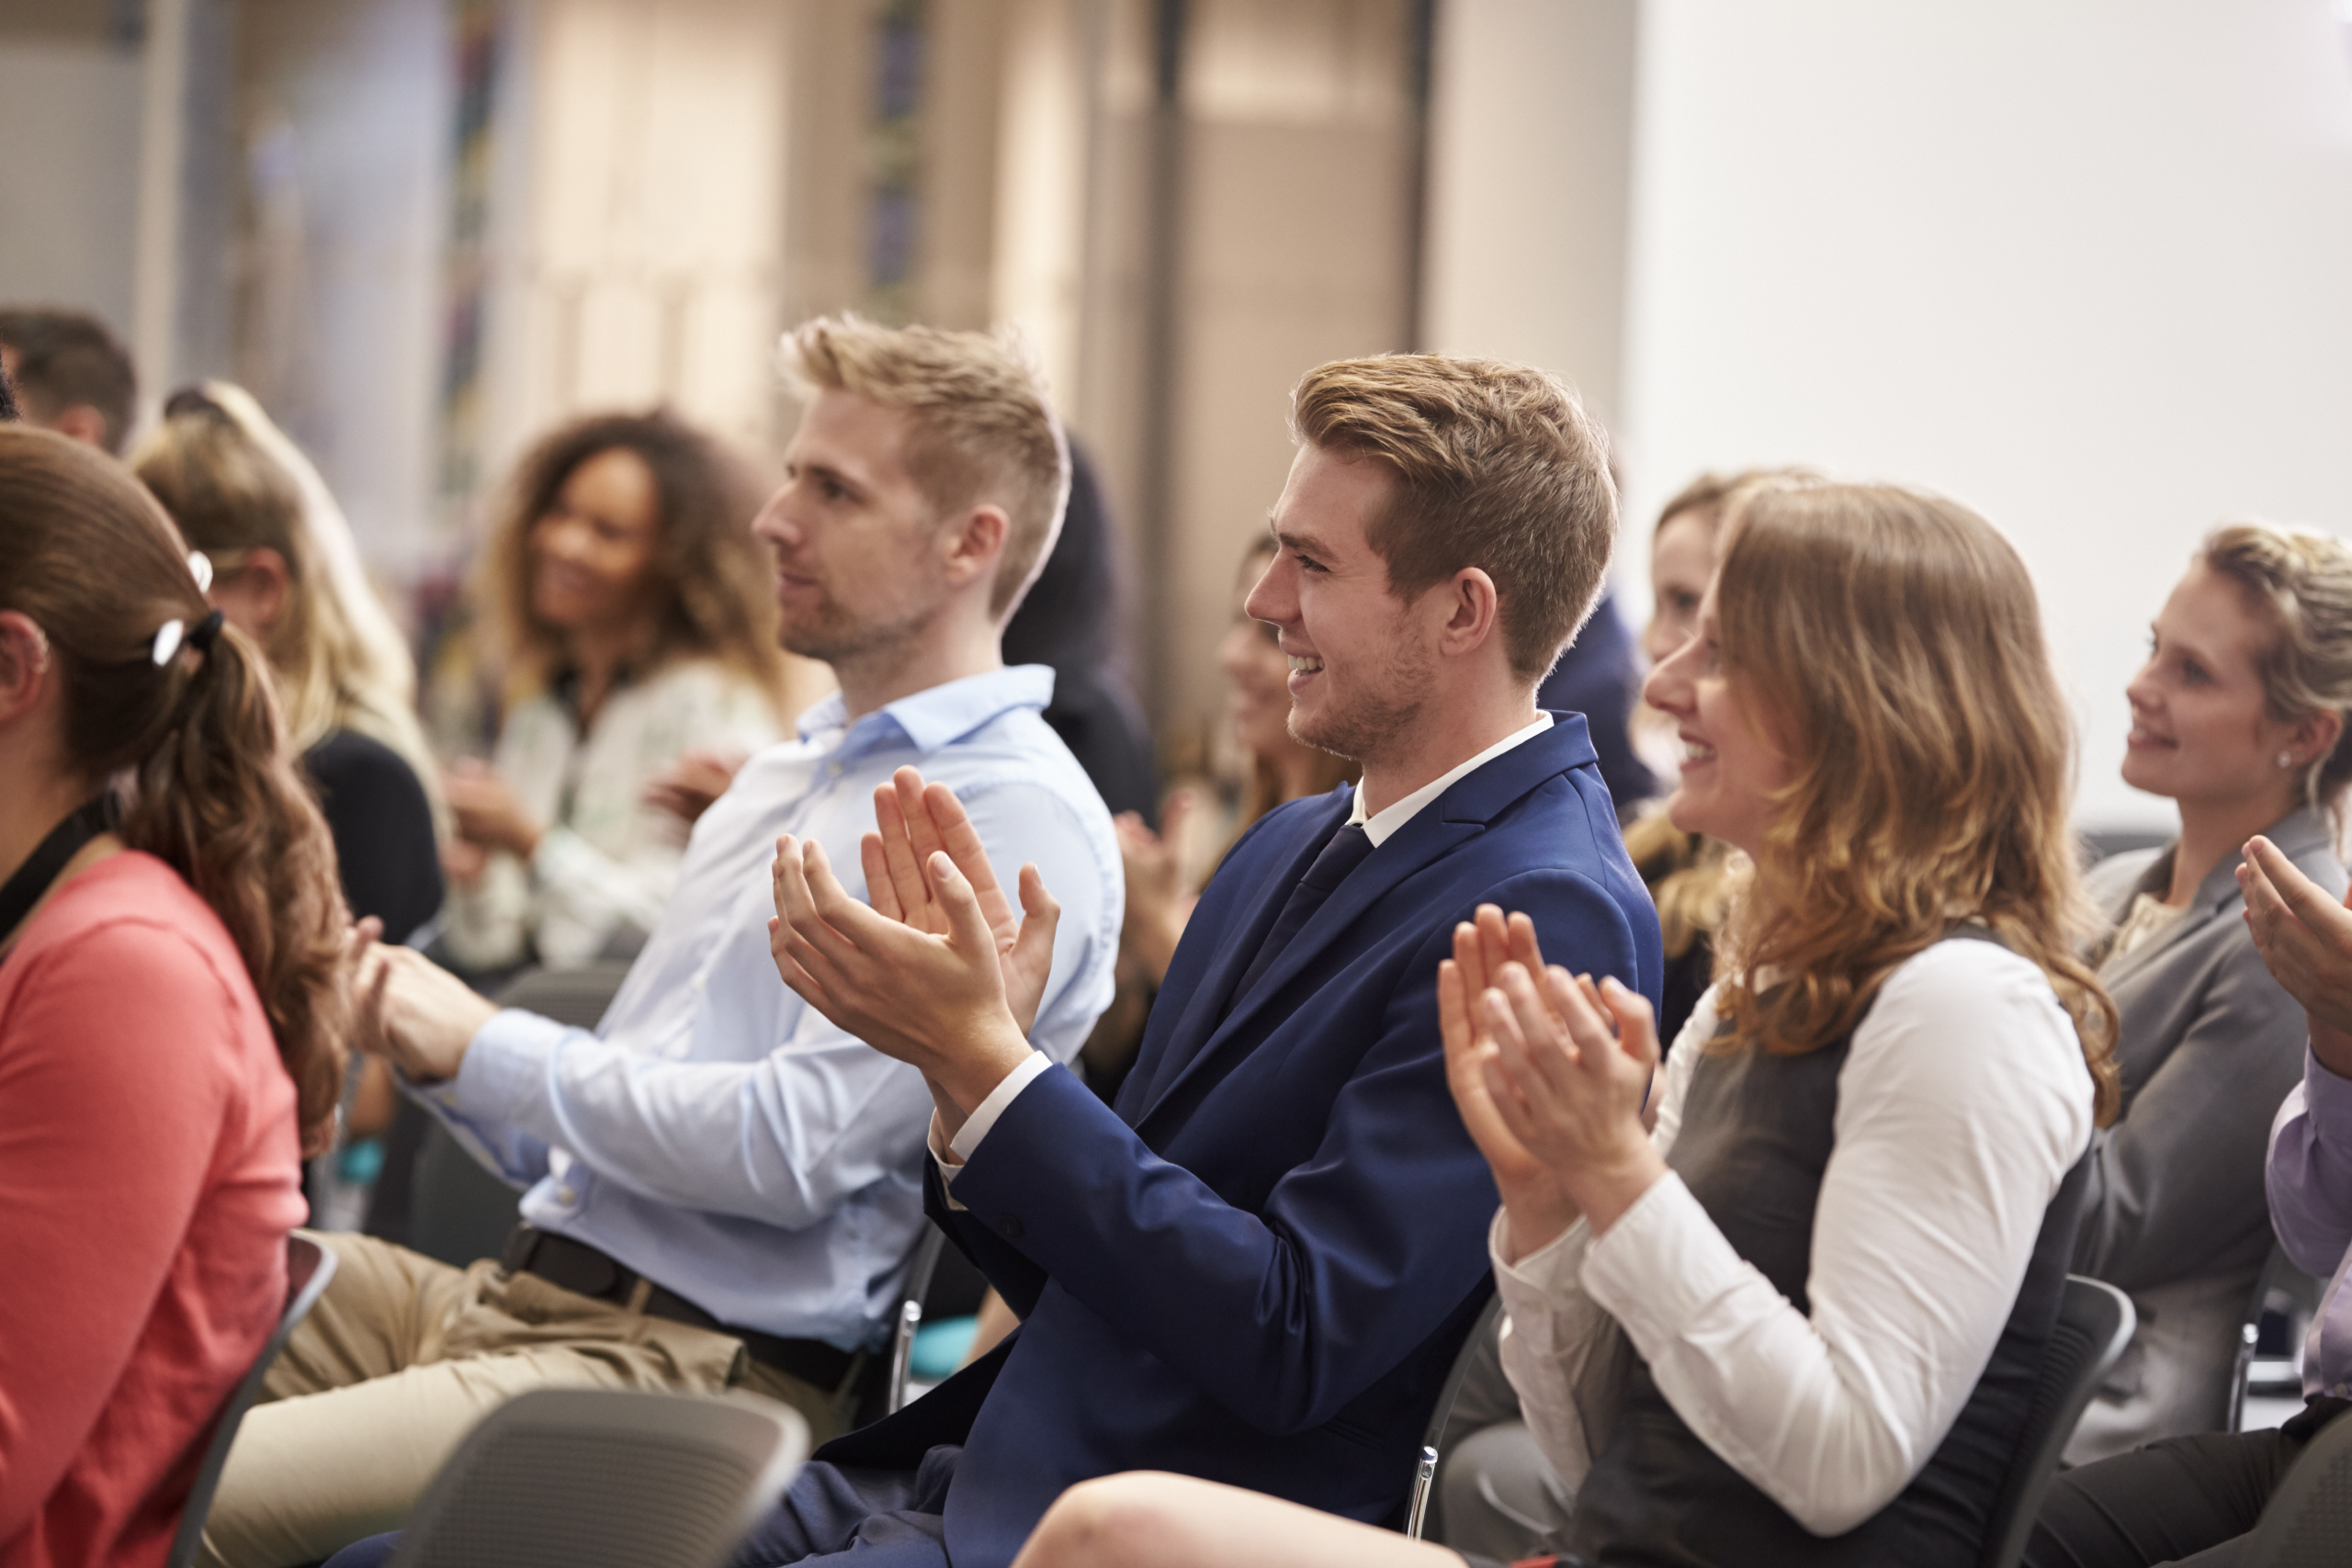 5 Ways to Keep Your Business Event Attendees Coming Back